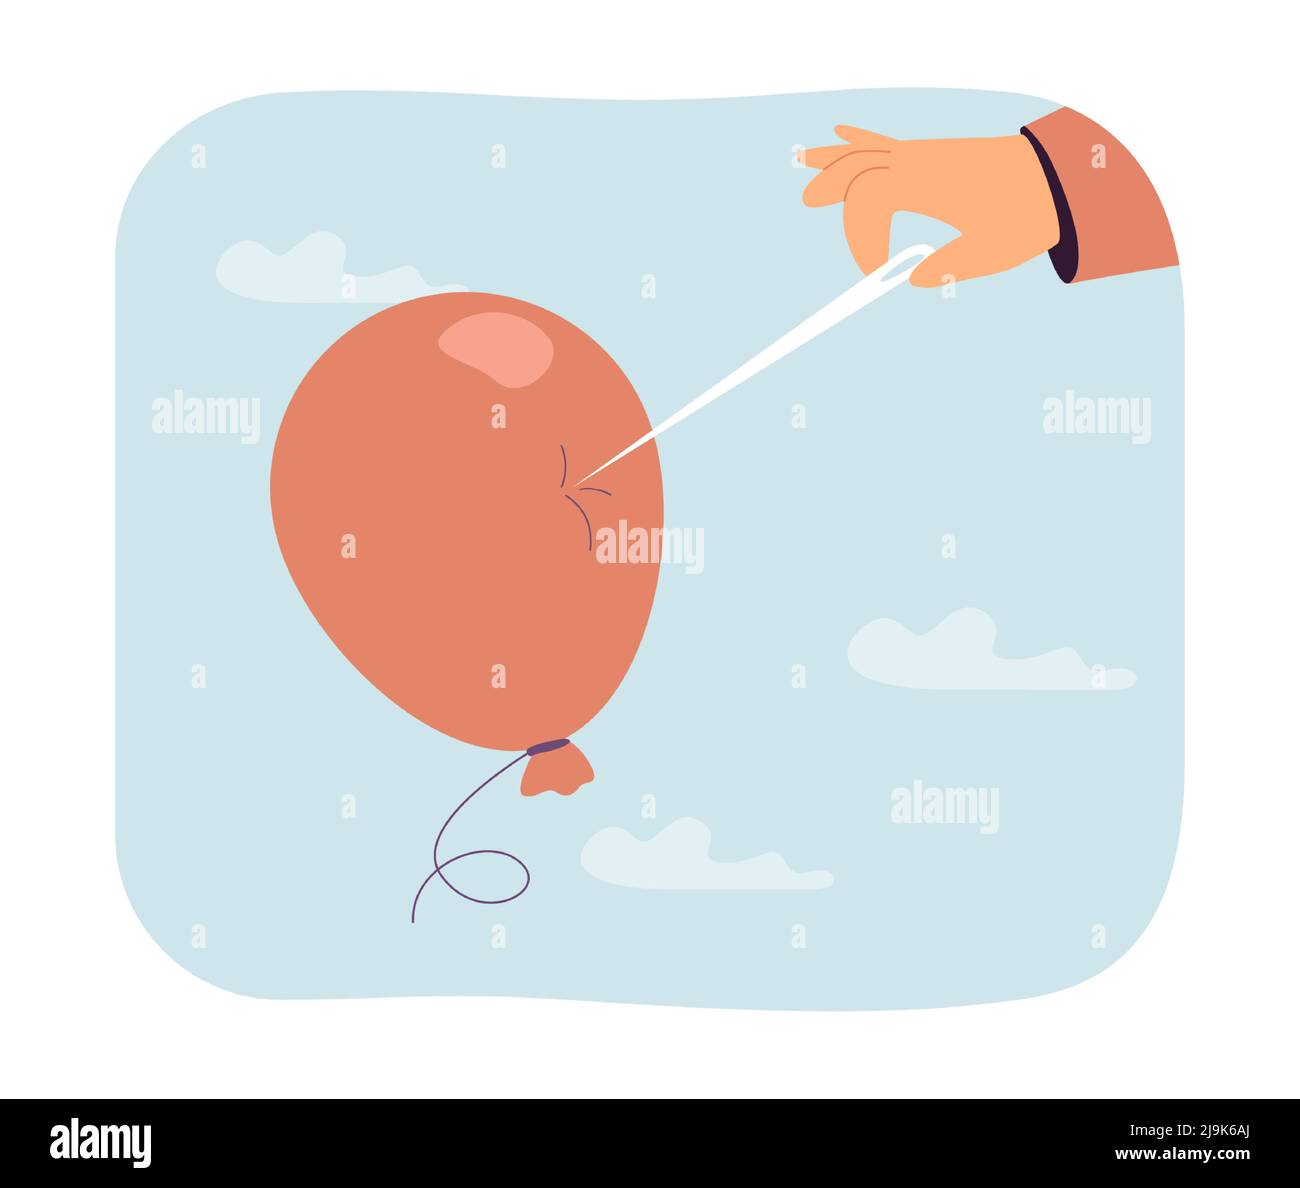 Hand holding big long needle to red balloon. Balloon before popping flat vector illustration. Problem, failure, risk concept for banner, website desig Stock Vector